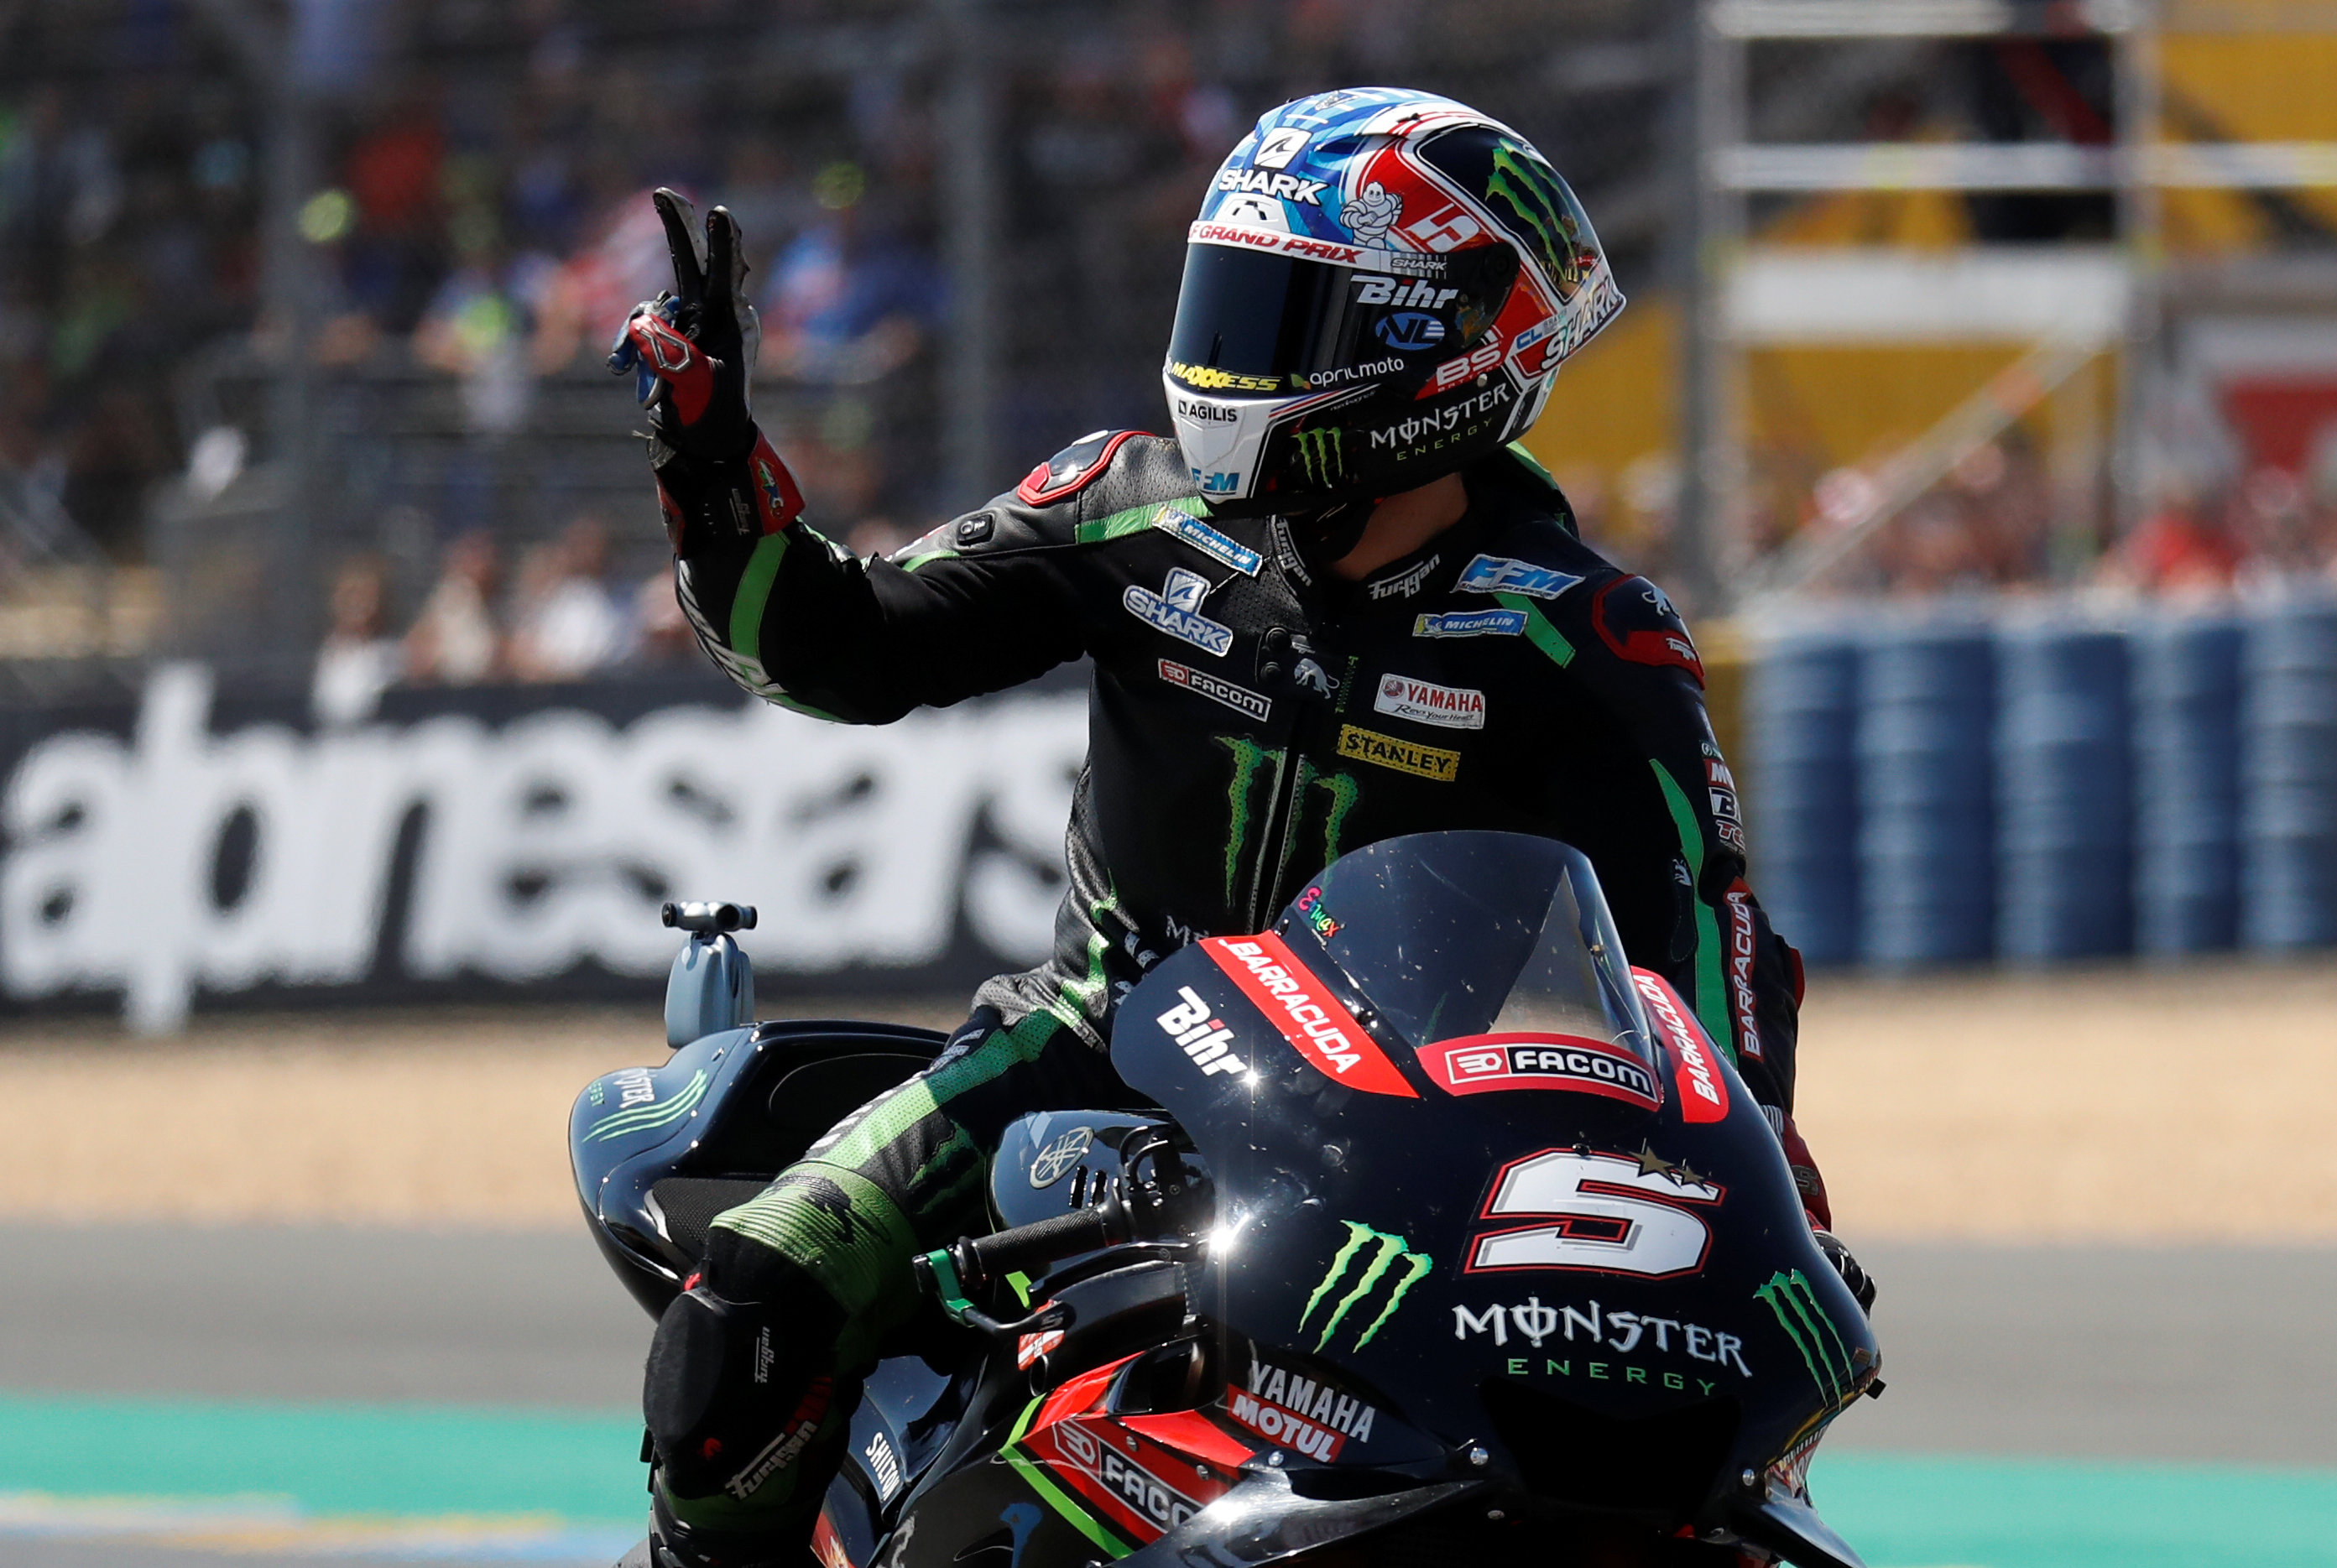 Motorsport: Zarco takes home pole for French MotoGP